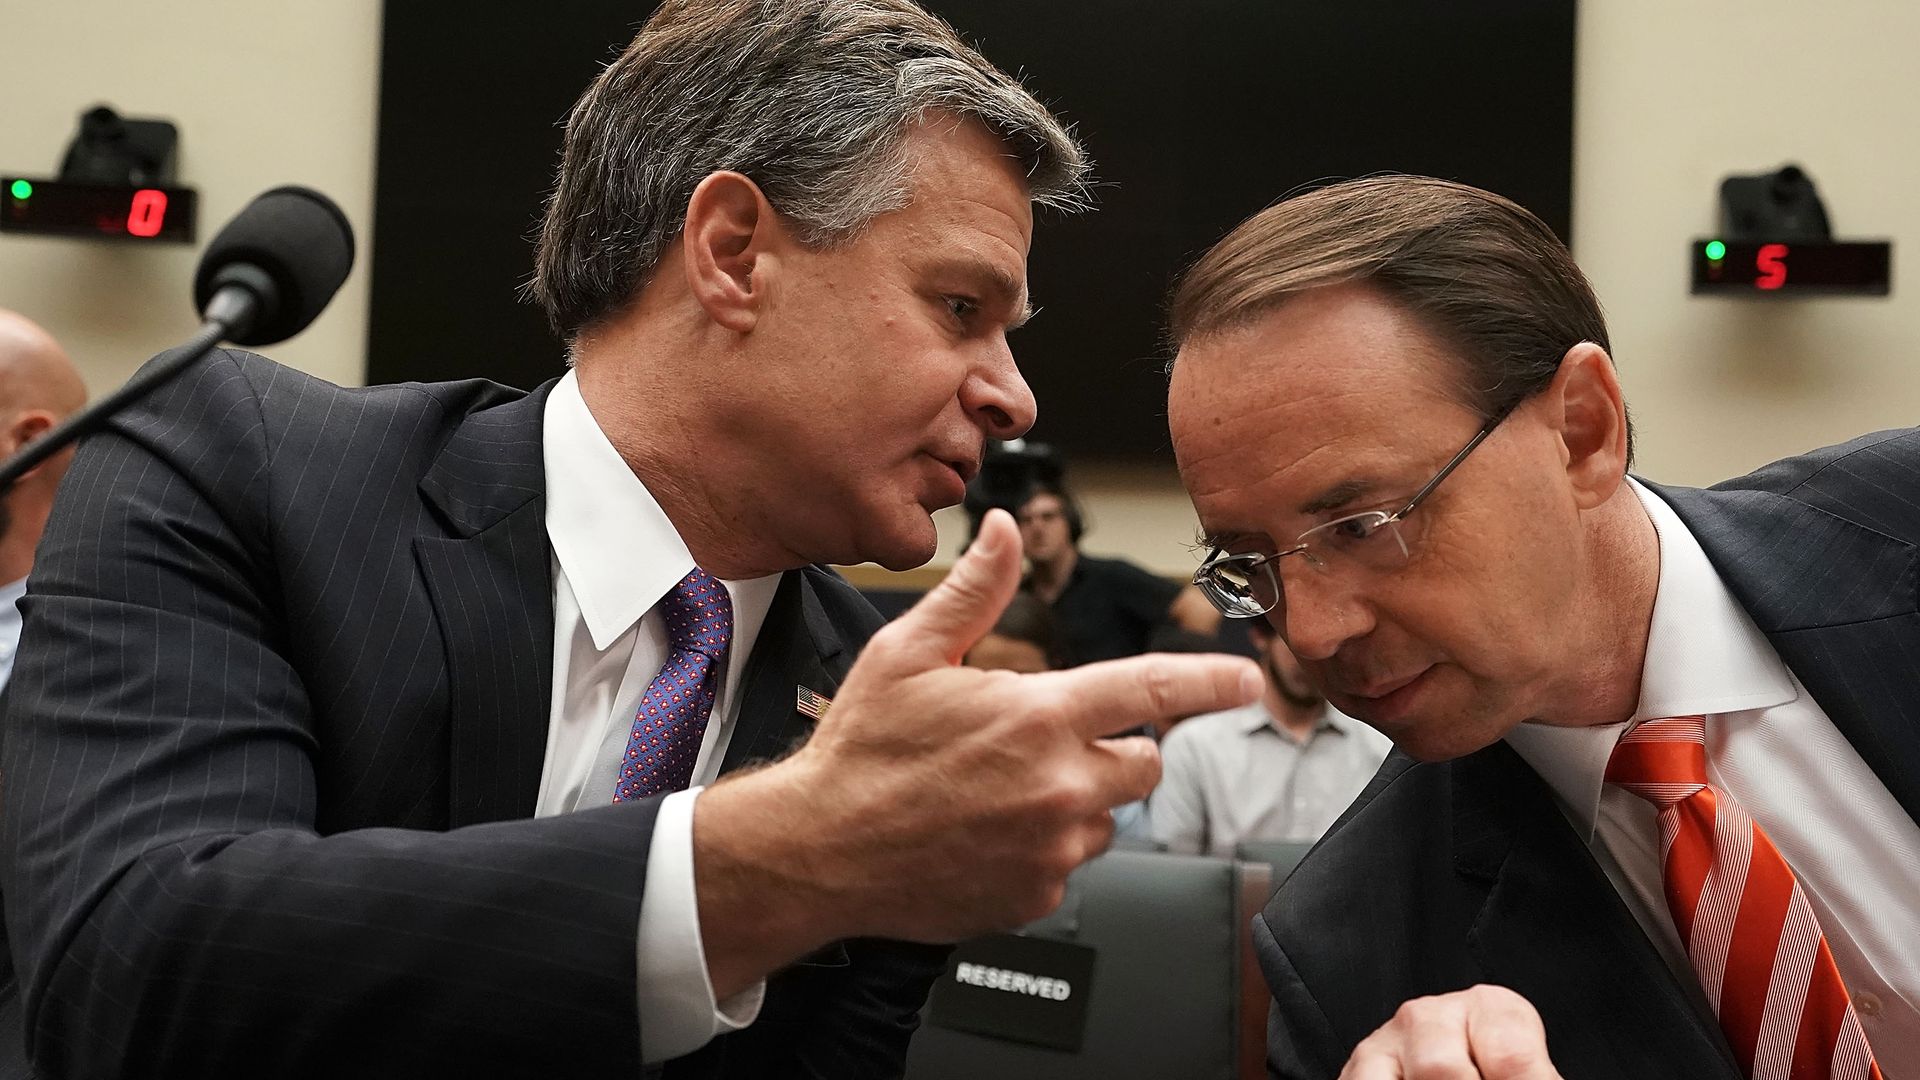 FBI director Christopher Wray leaning over to talk to Rod Rosenstein